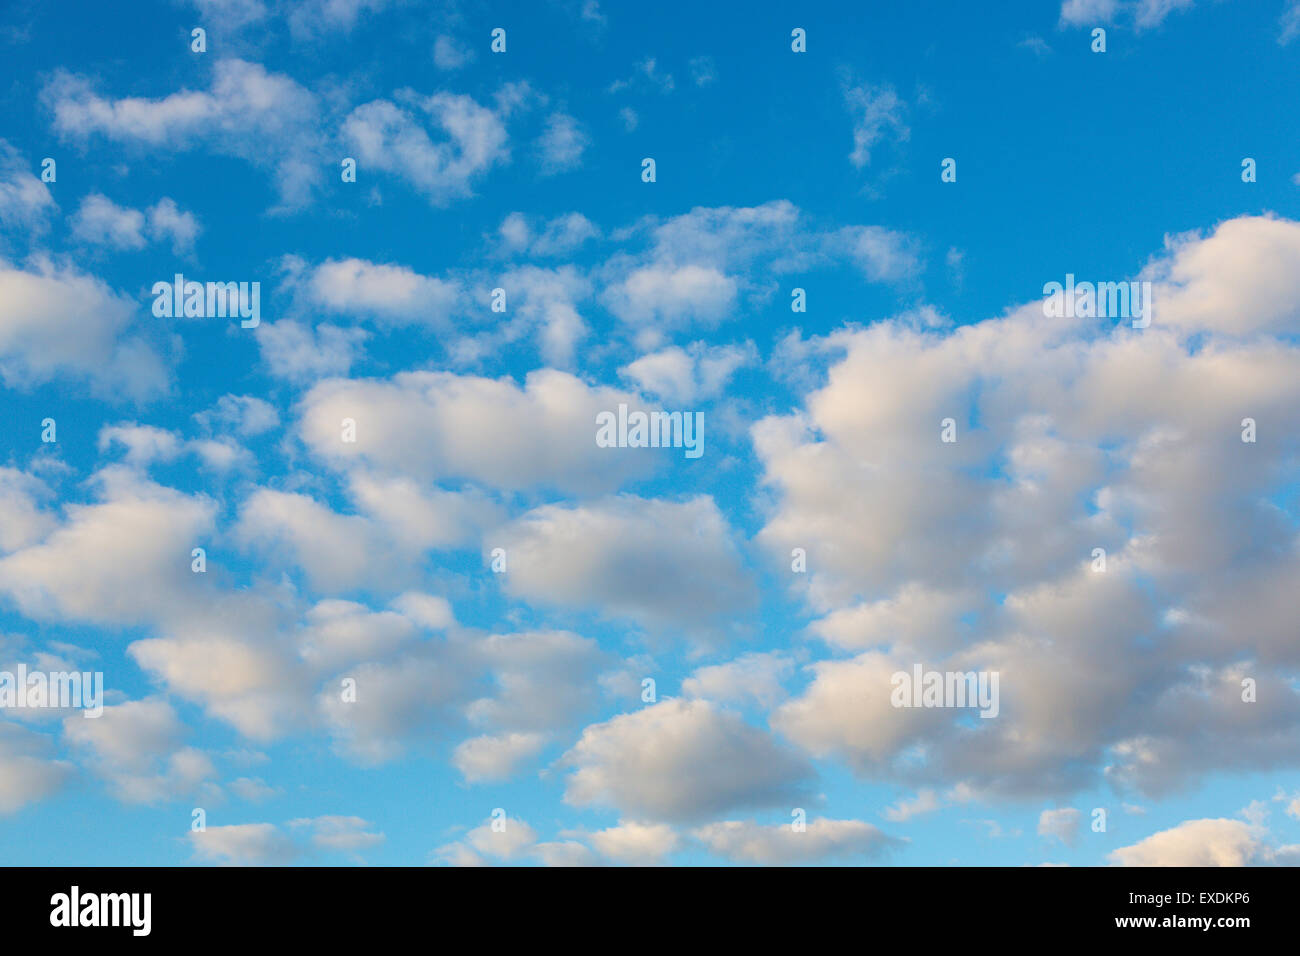 White clouds in a blue sky Stock Photo